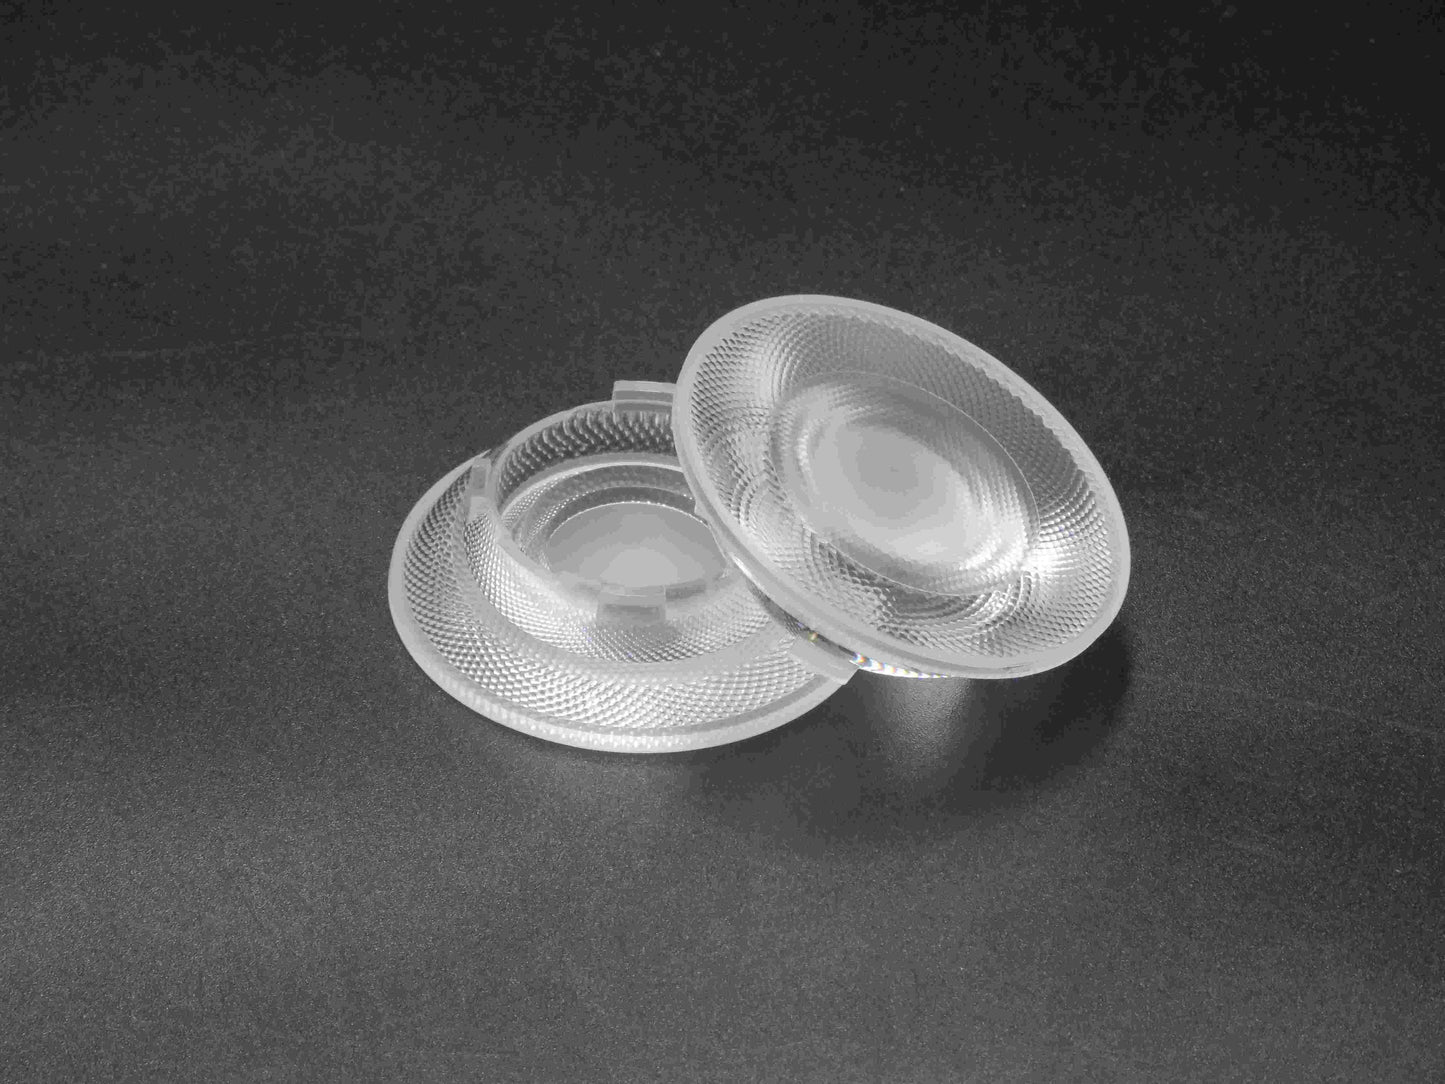 China factory produces ultra-thin anti-glare lens downlight dimmable spotlight lens embedded COB lens